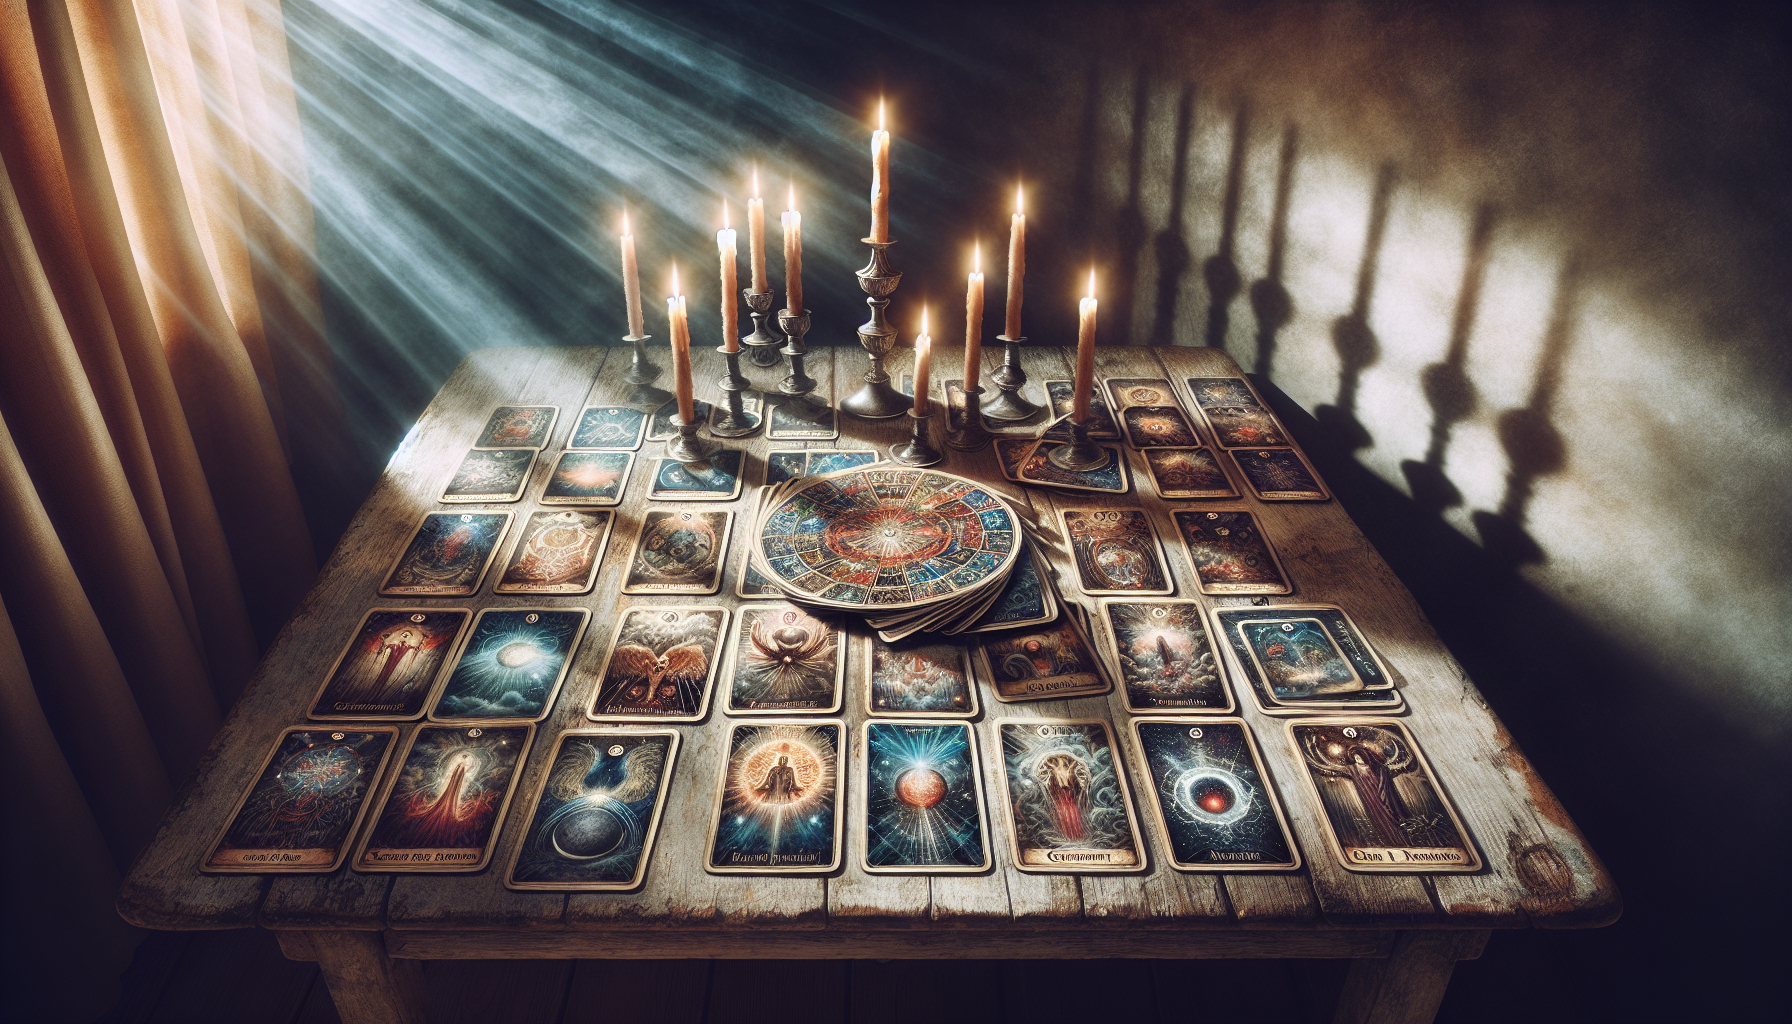 Illustration of tarot cards being laid out for a reading